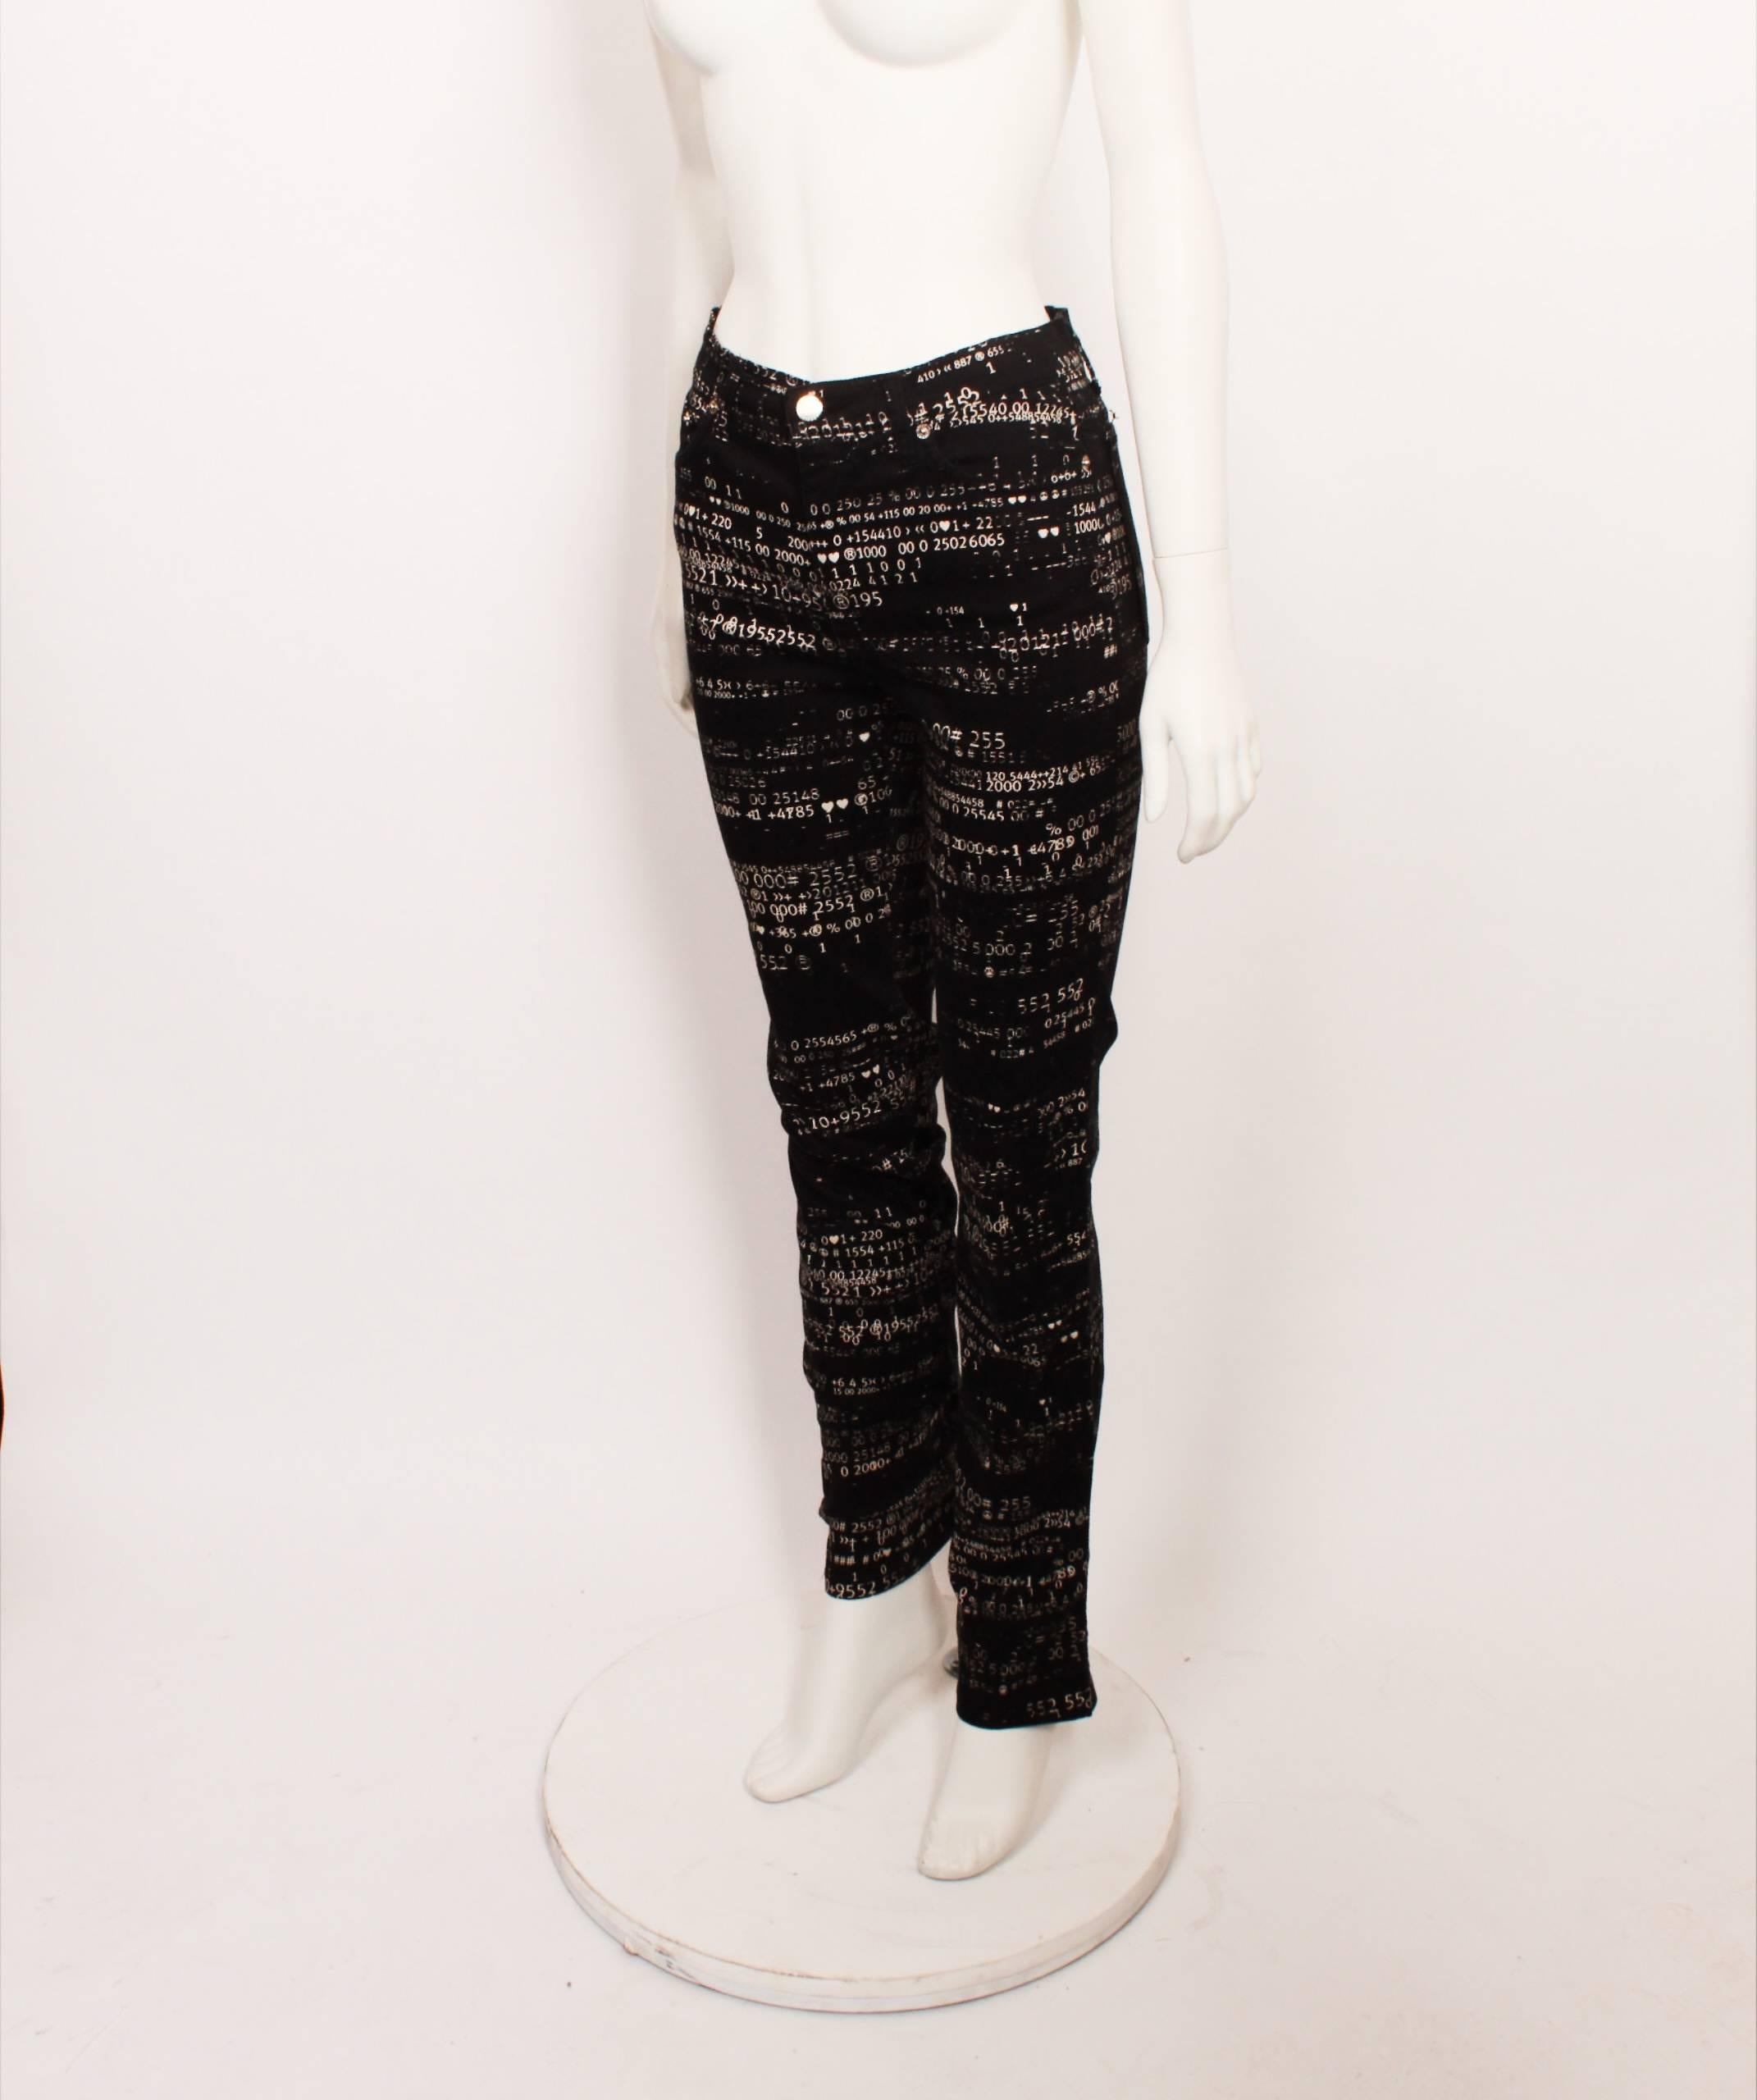 Black Moschino Jeans featuring white numerical print and silver hardware details. 